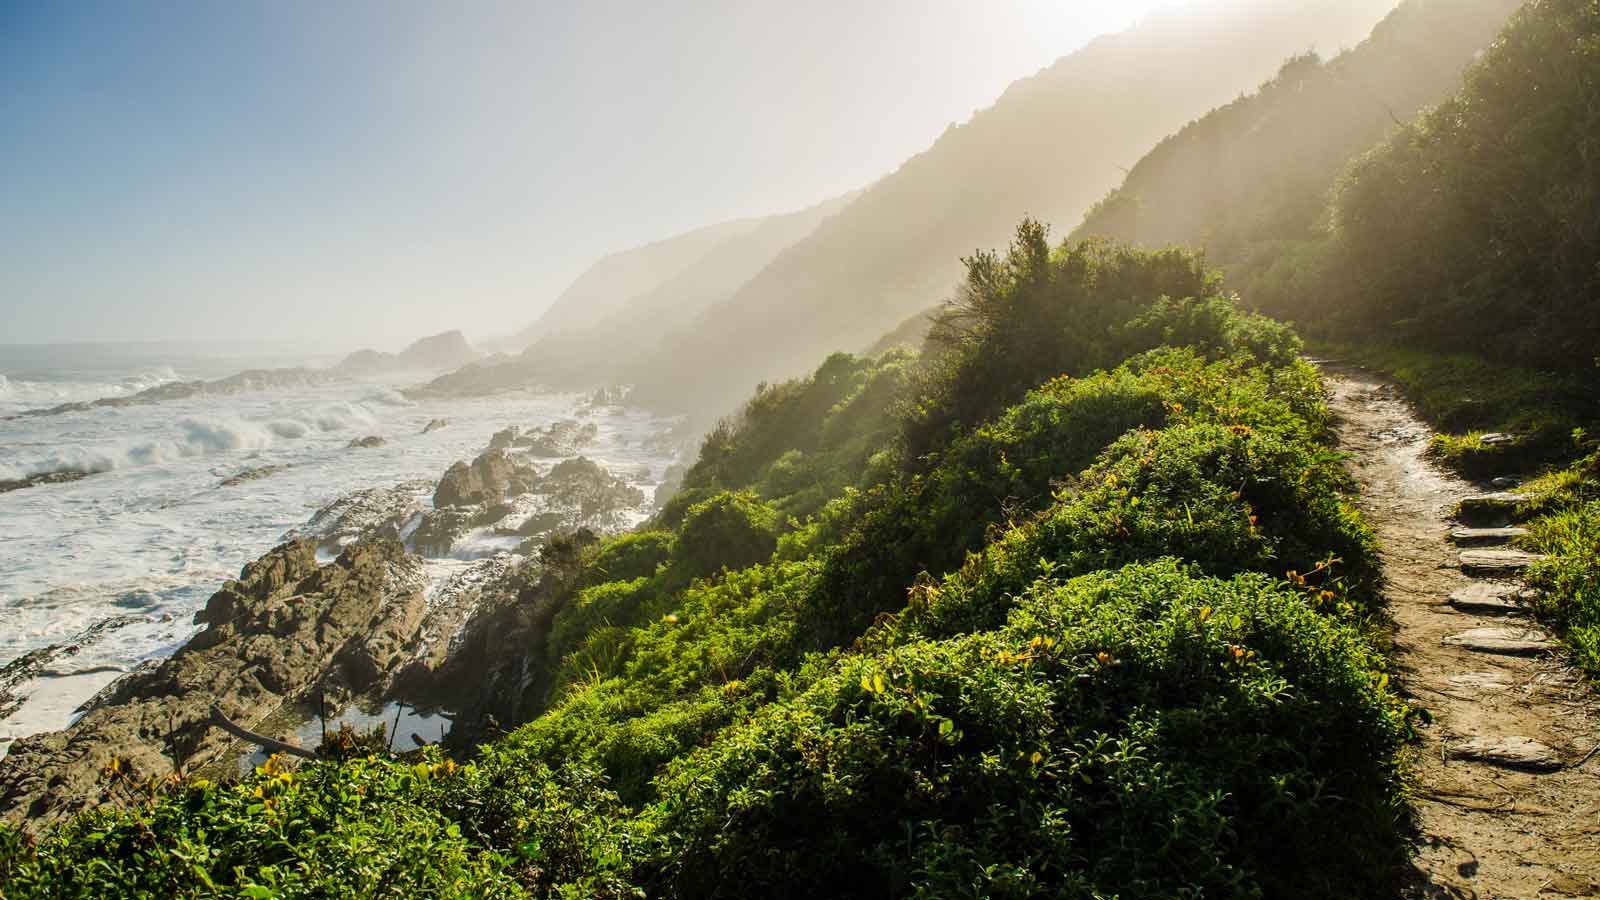 <p>While in Tsitsikamma, consider taking the Garden Route. This 186-mile road takes you past some of the most breathtaking scenery you will ever see of mountain passes, seascapes, diverse ecosystems, and quaint coastal towns.</p>